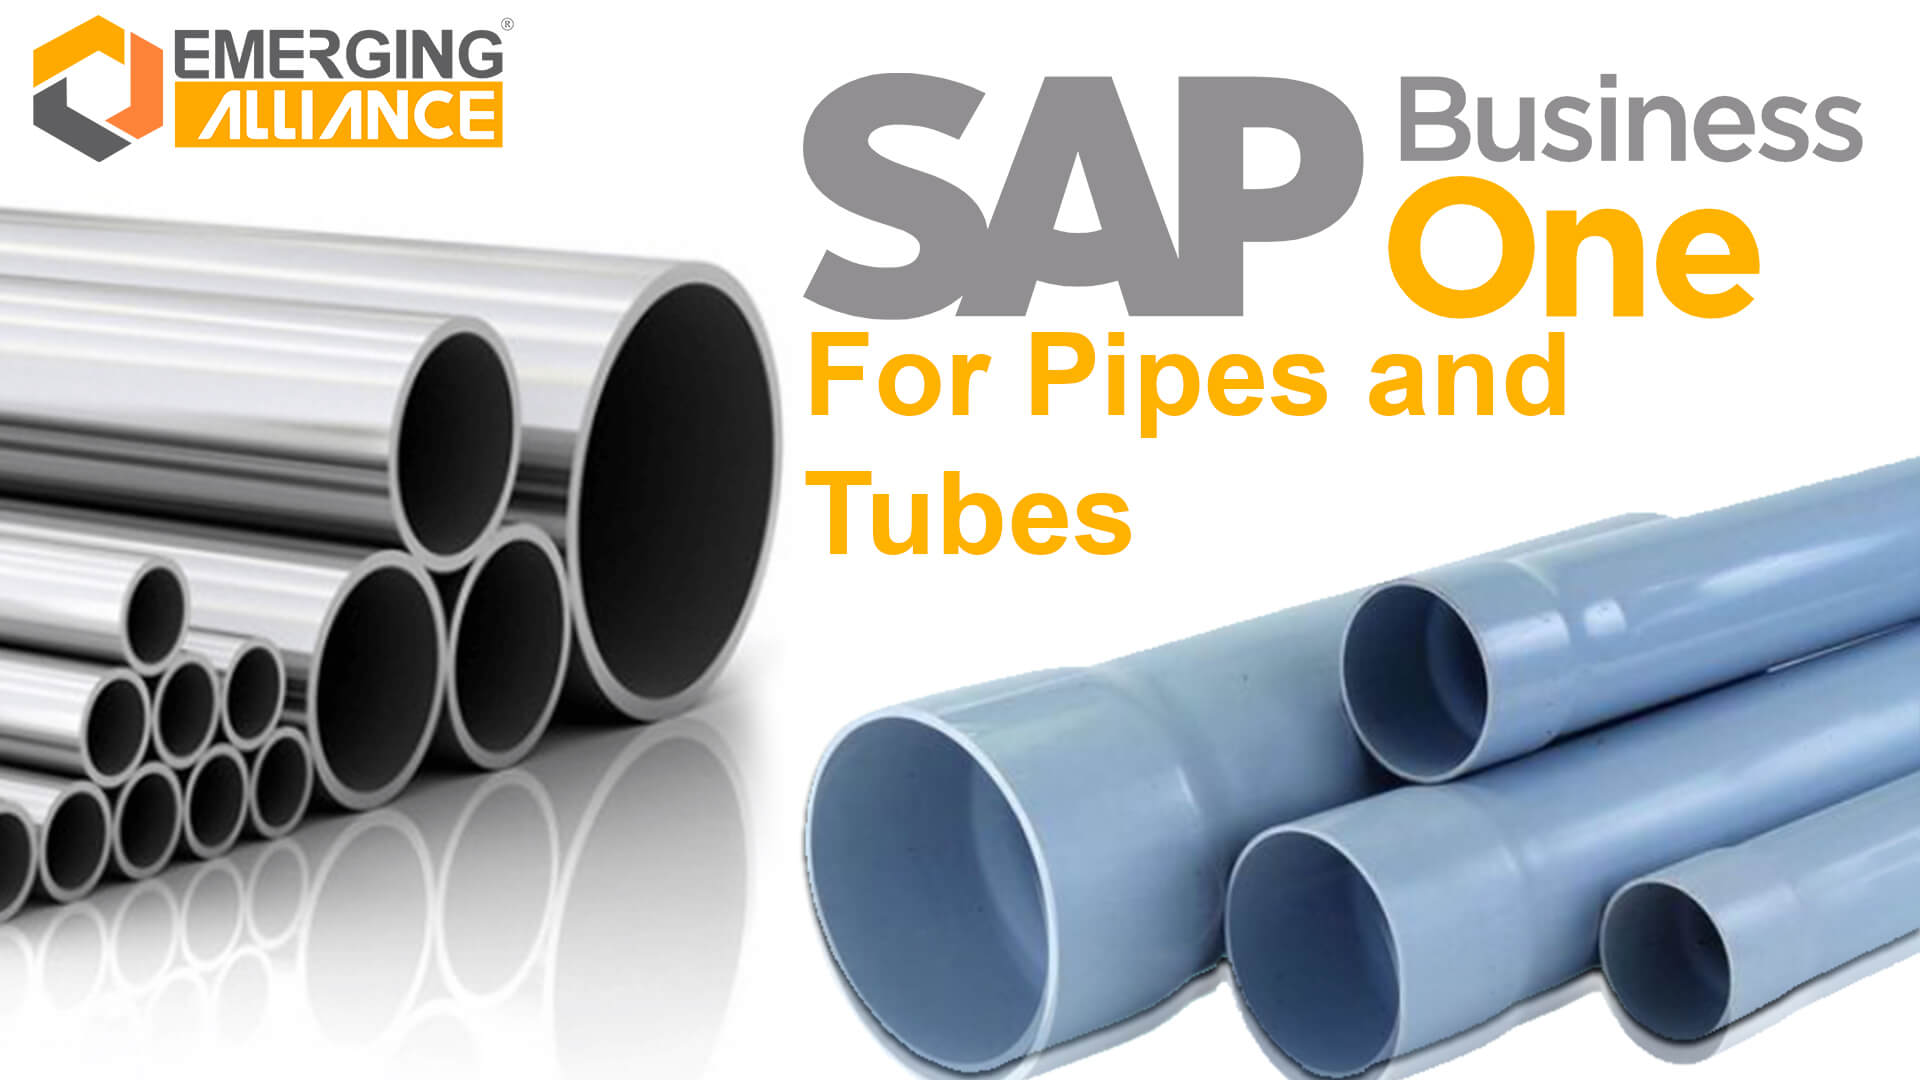 sap business one for pipes and tubes